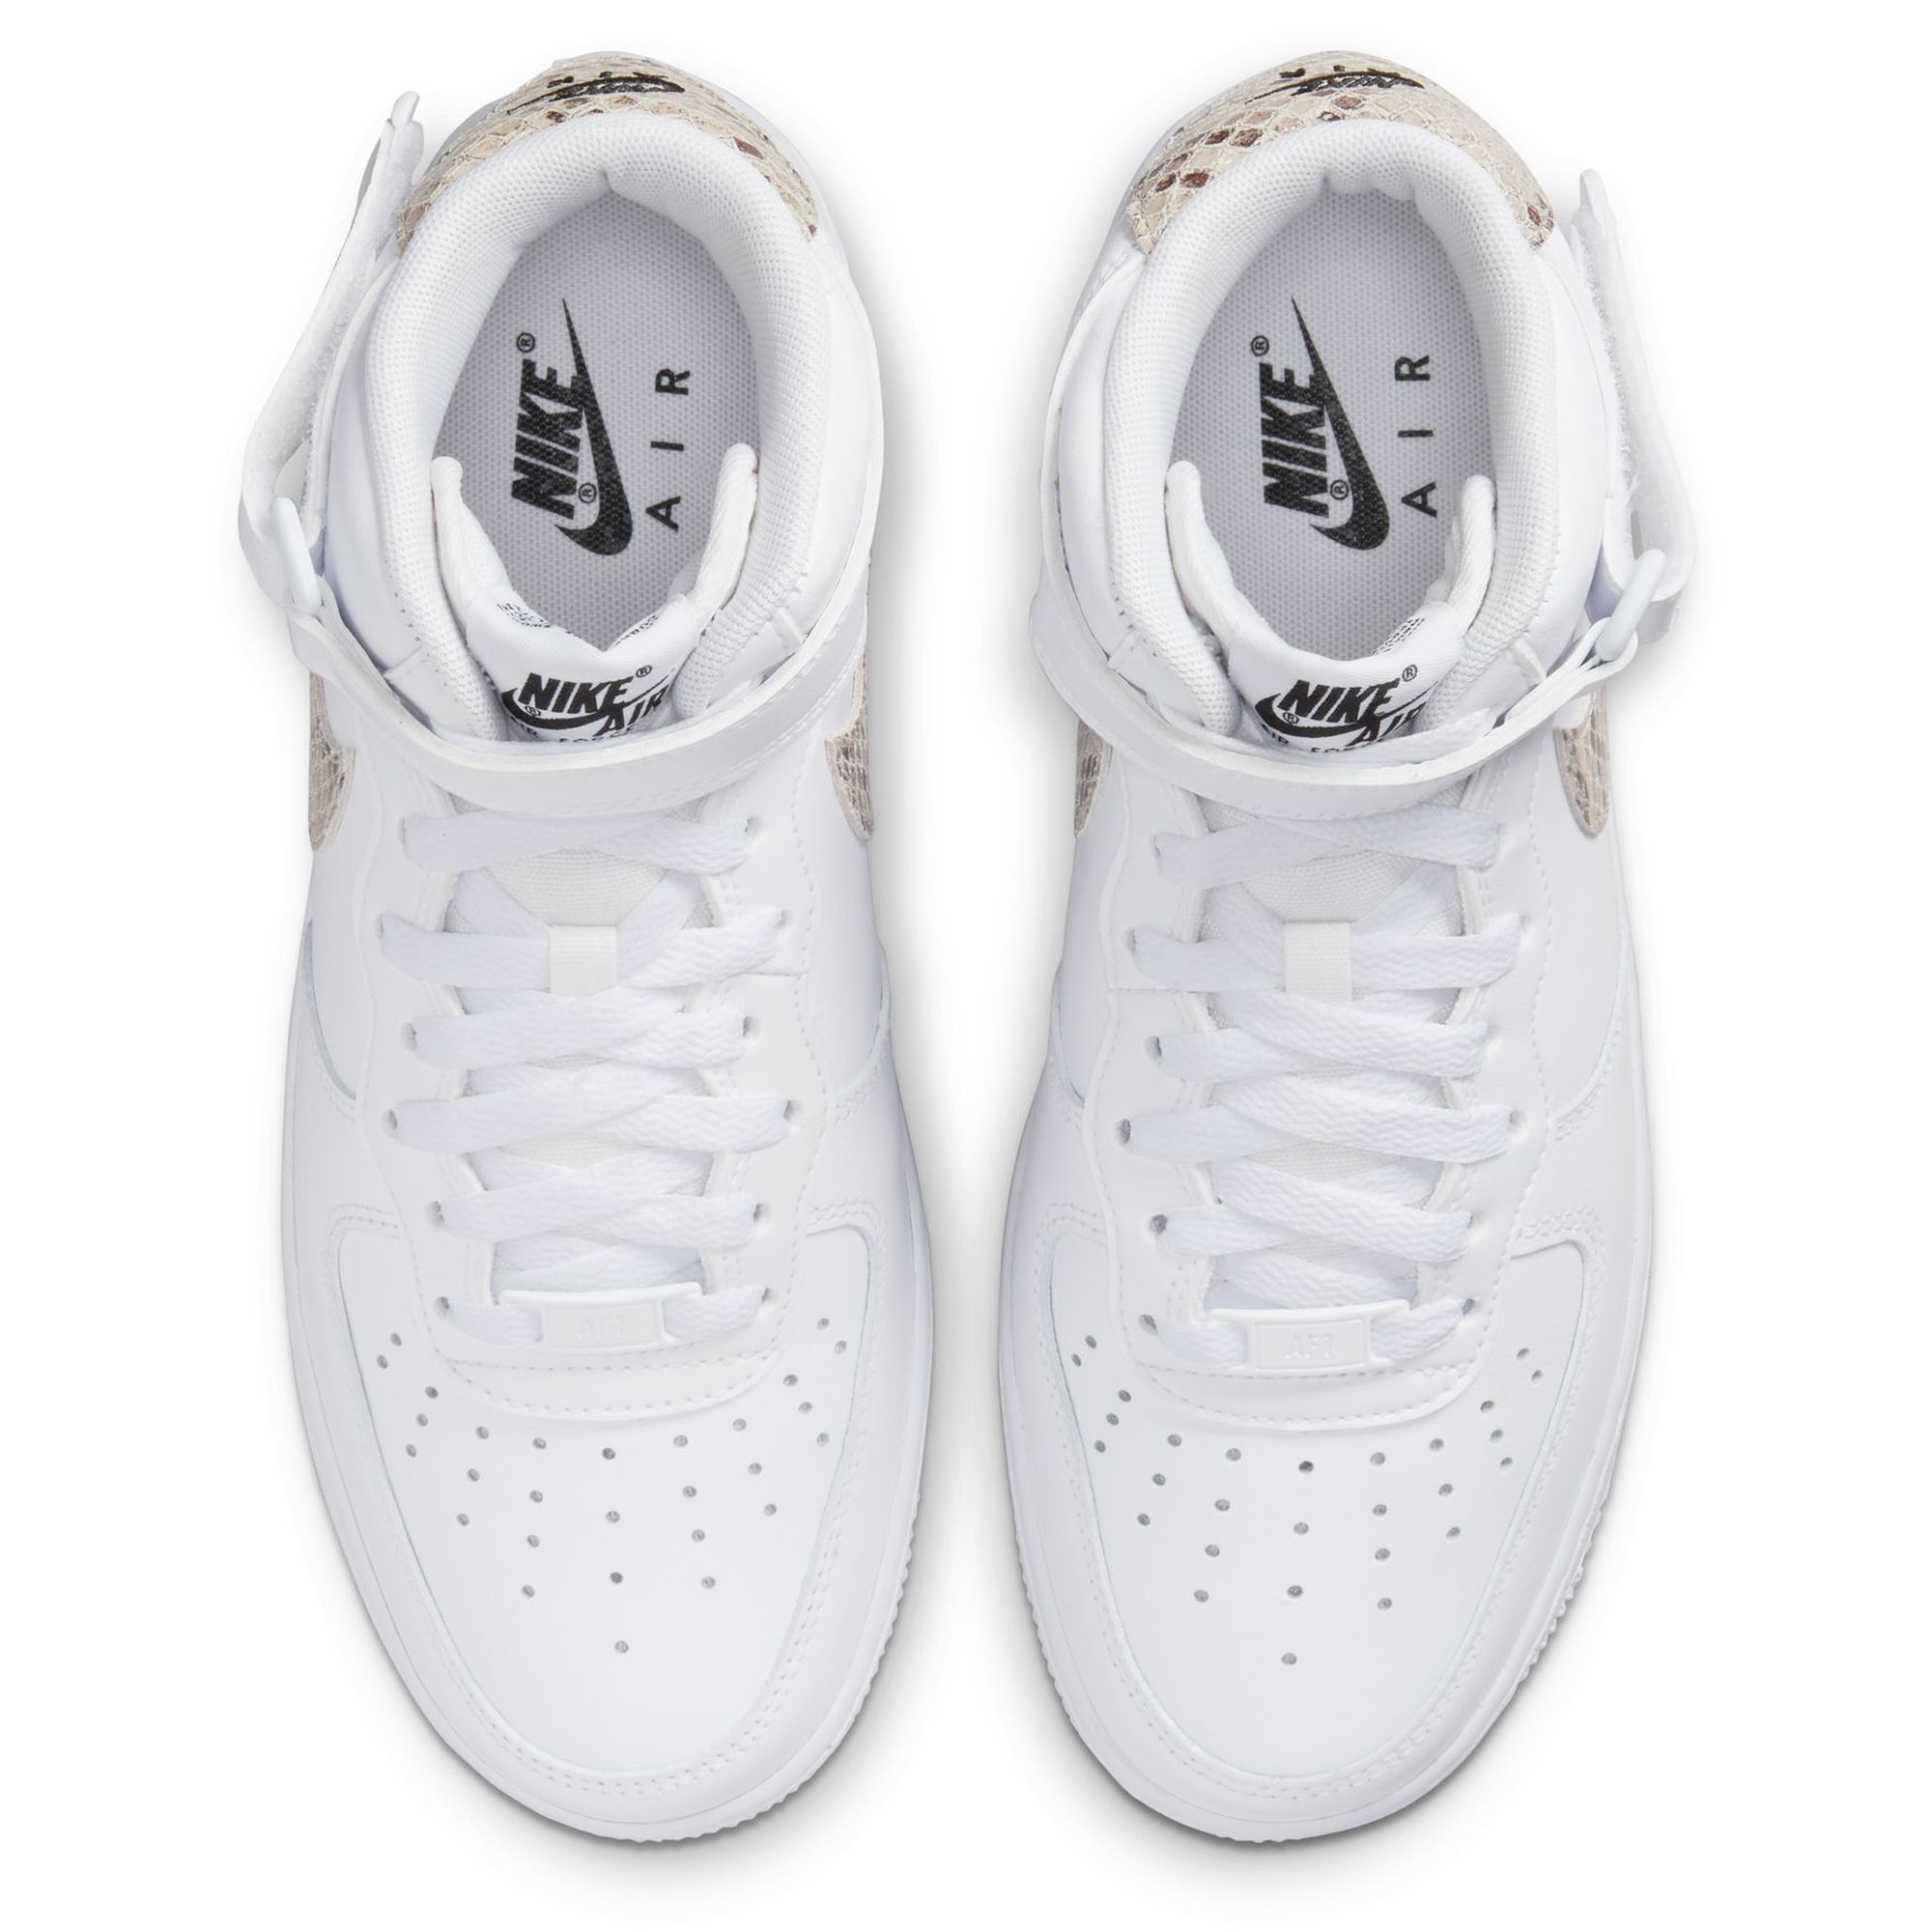 Nike Air Force 1'07 mid sneakers in white